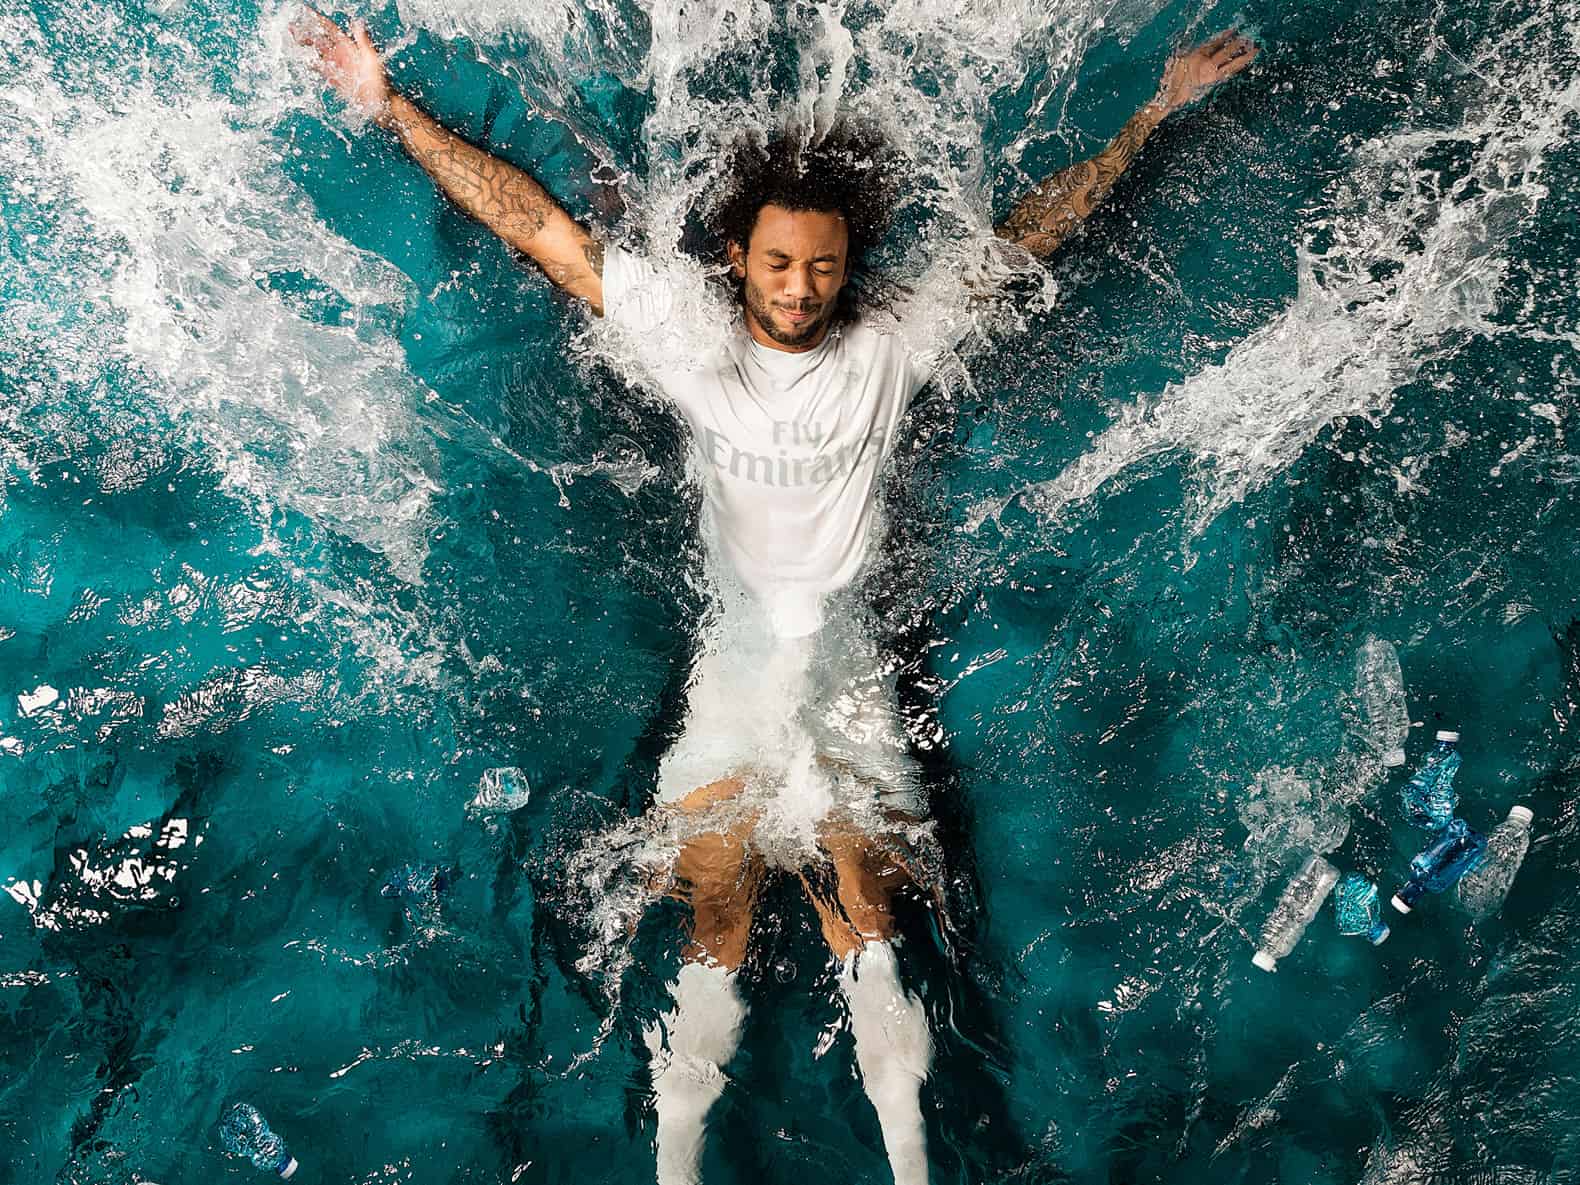 Credit: Adidas x Parley for the Oceans